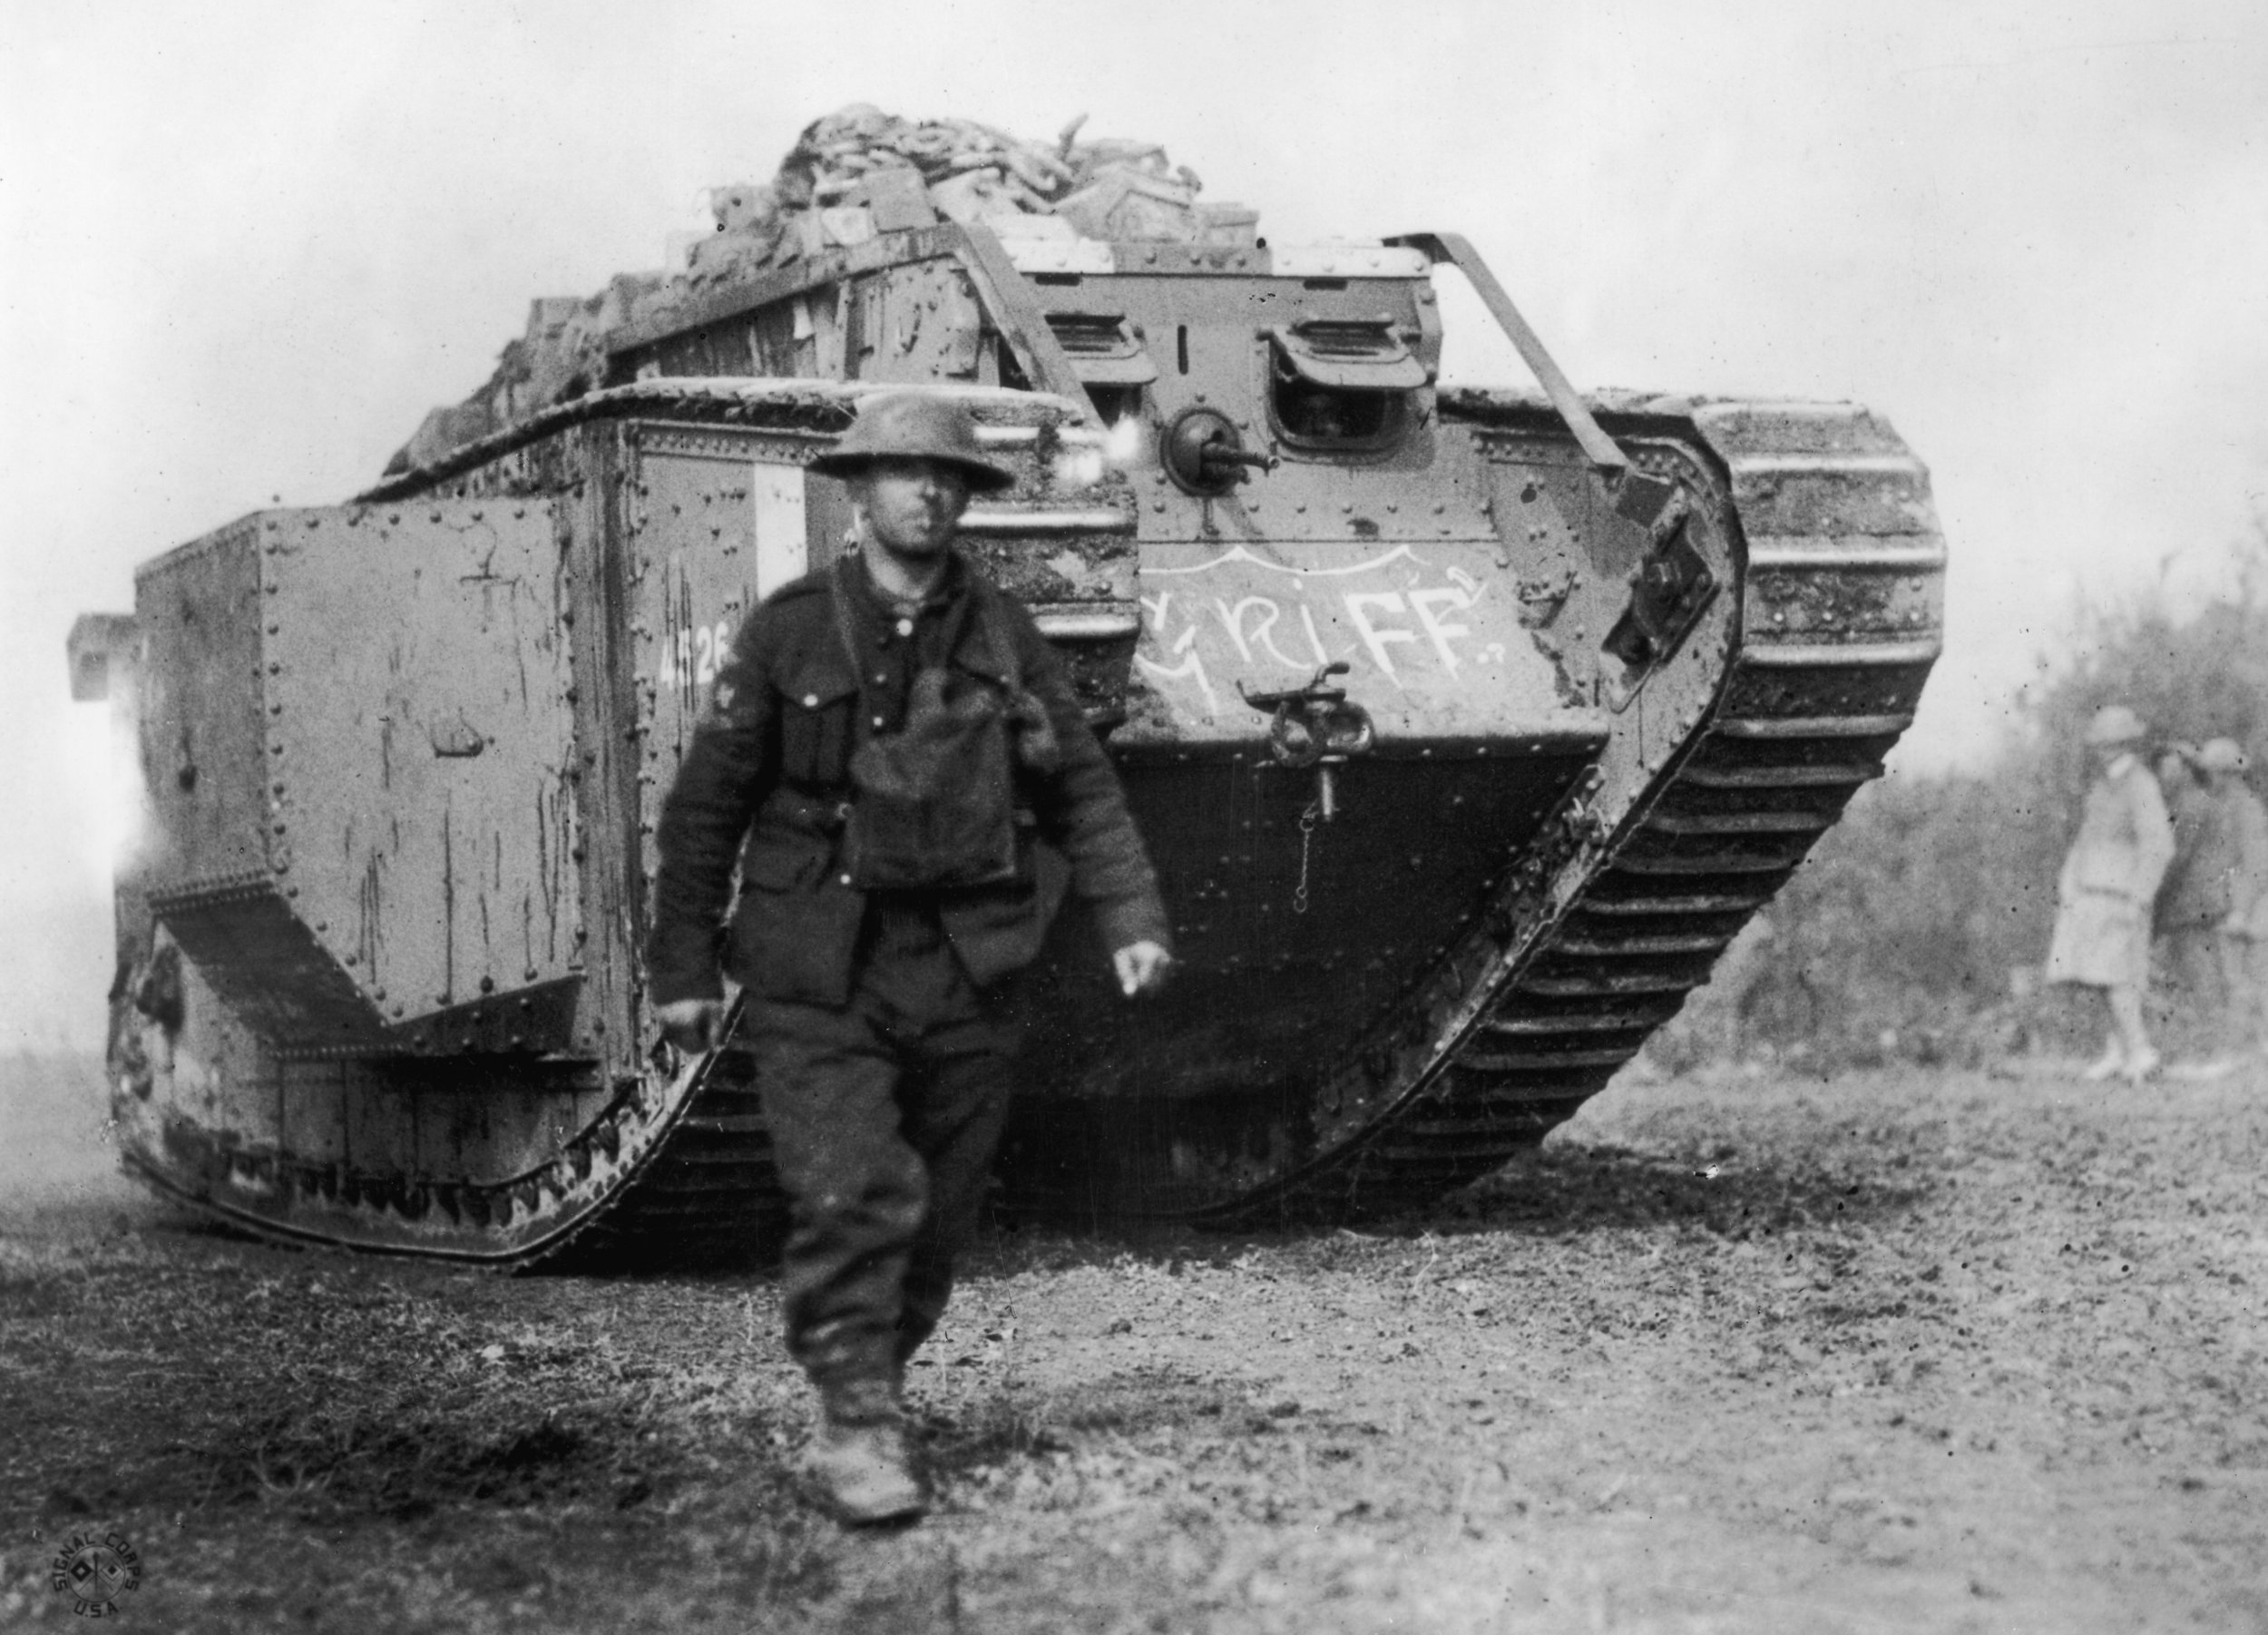 was the battle of amiens the first battle with tanks